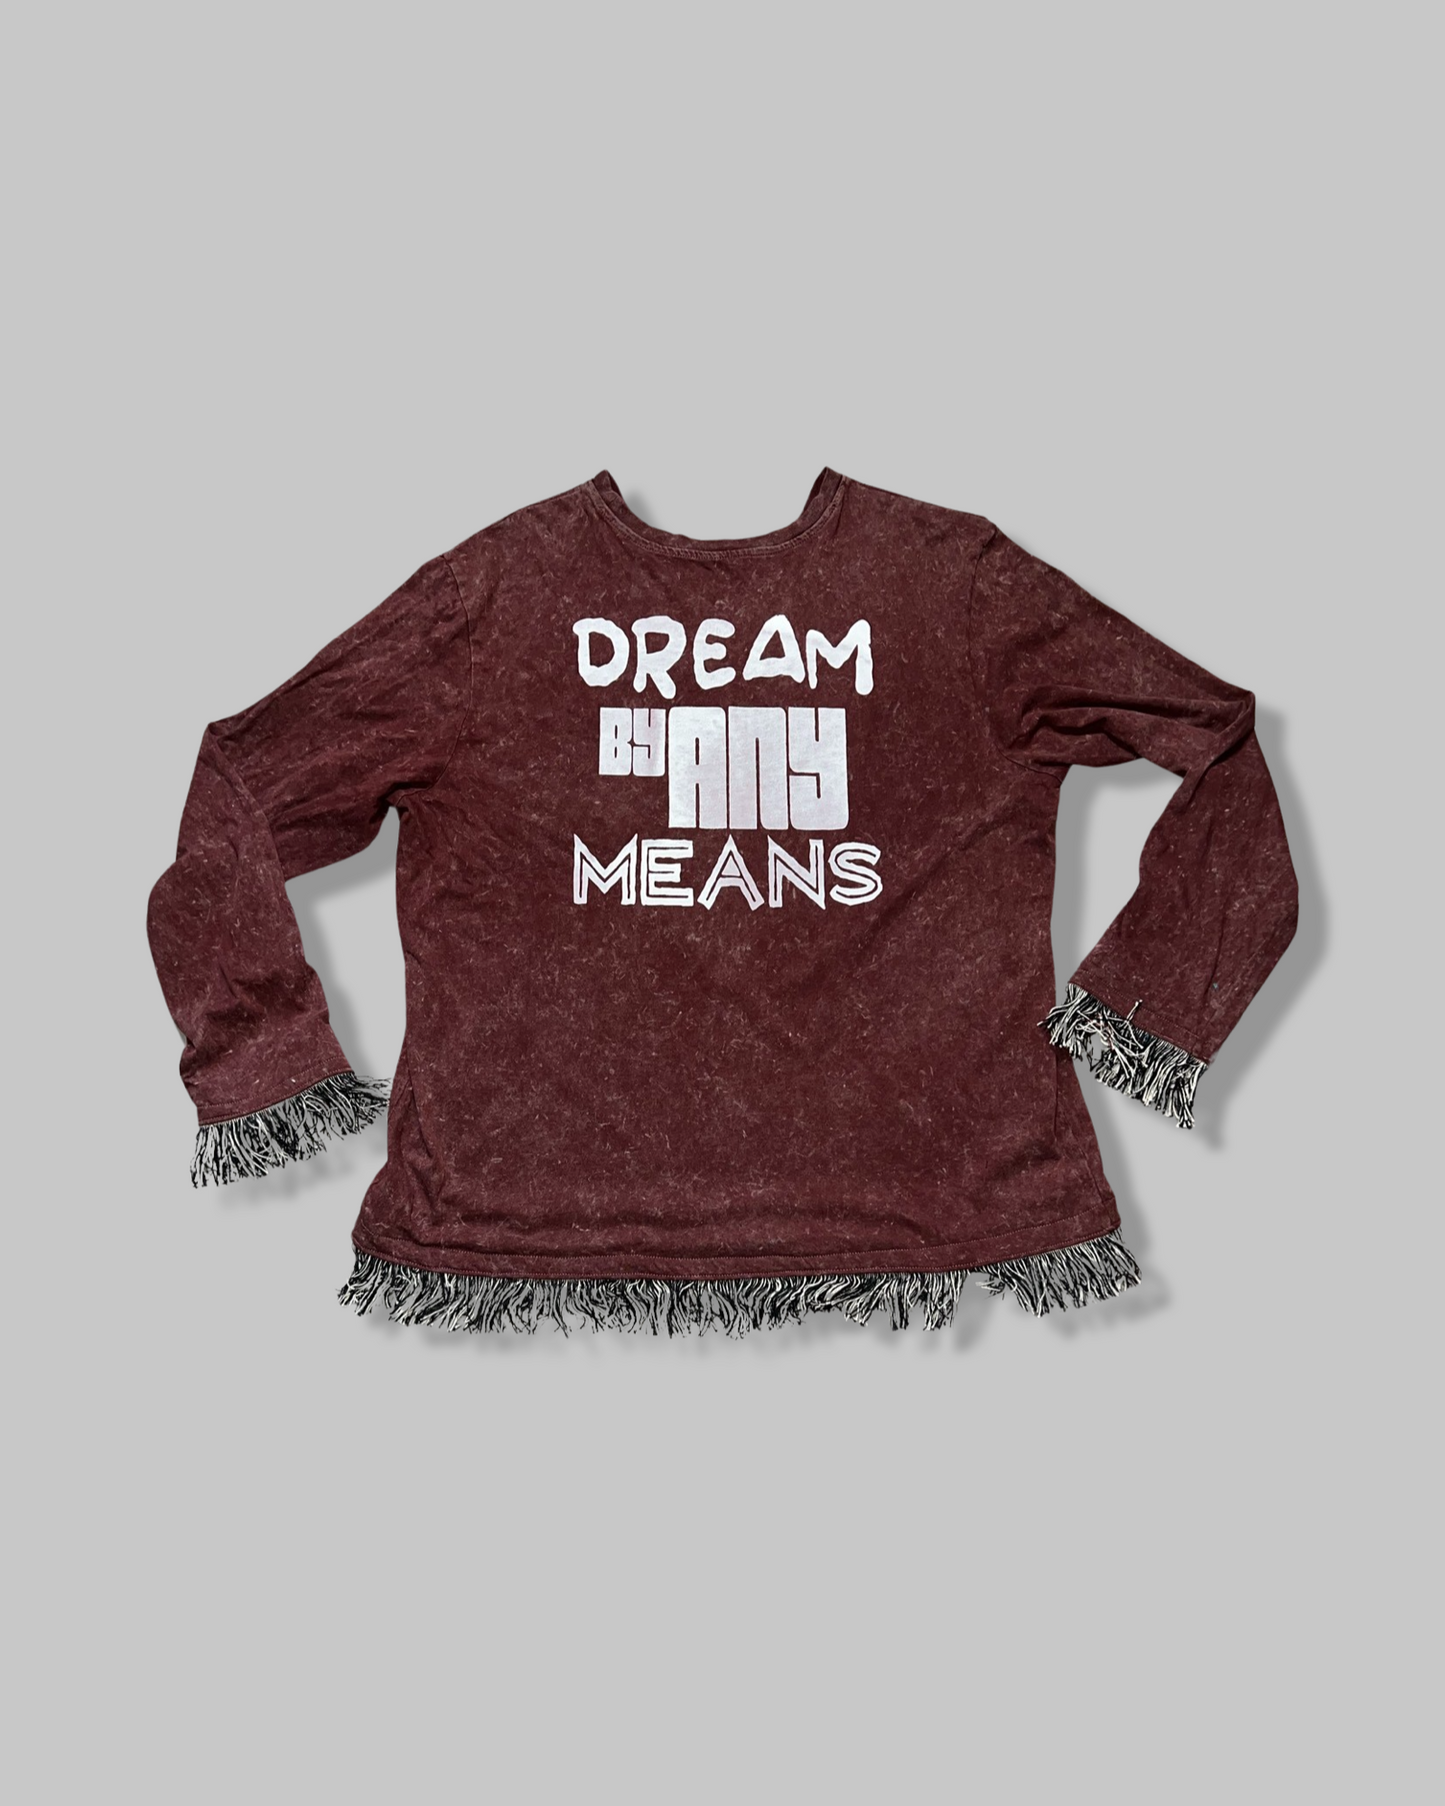 Dream By Any Means Shirt (XL)